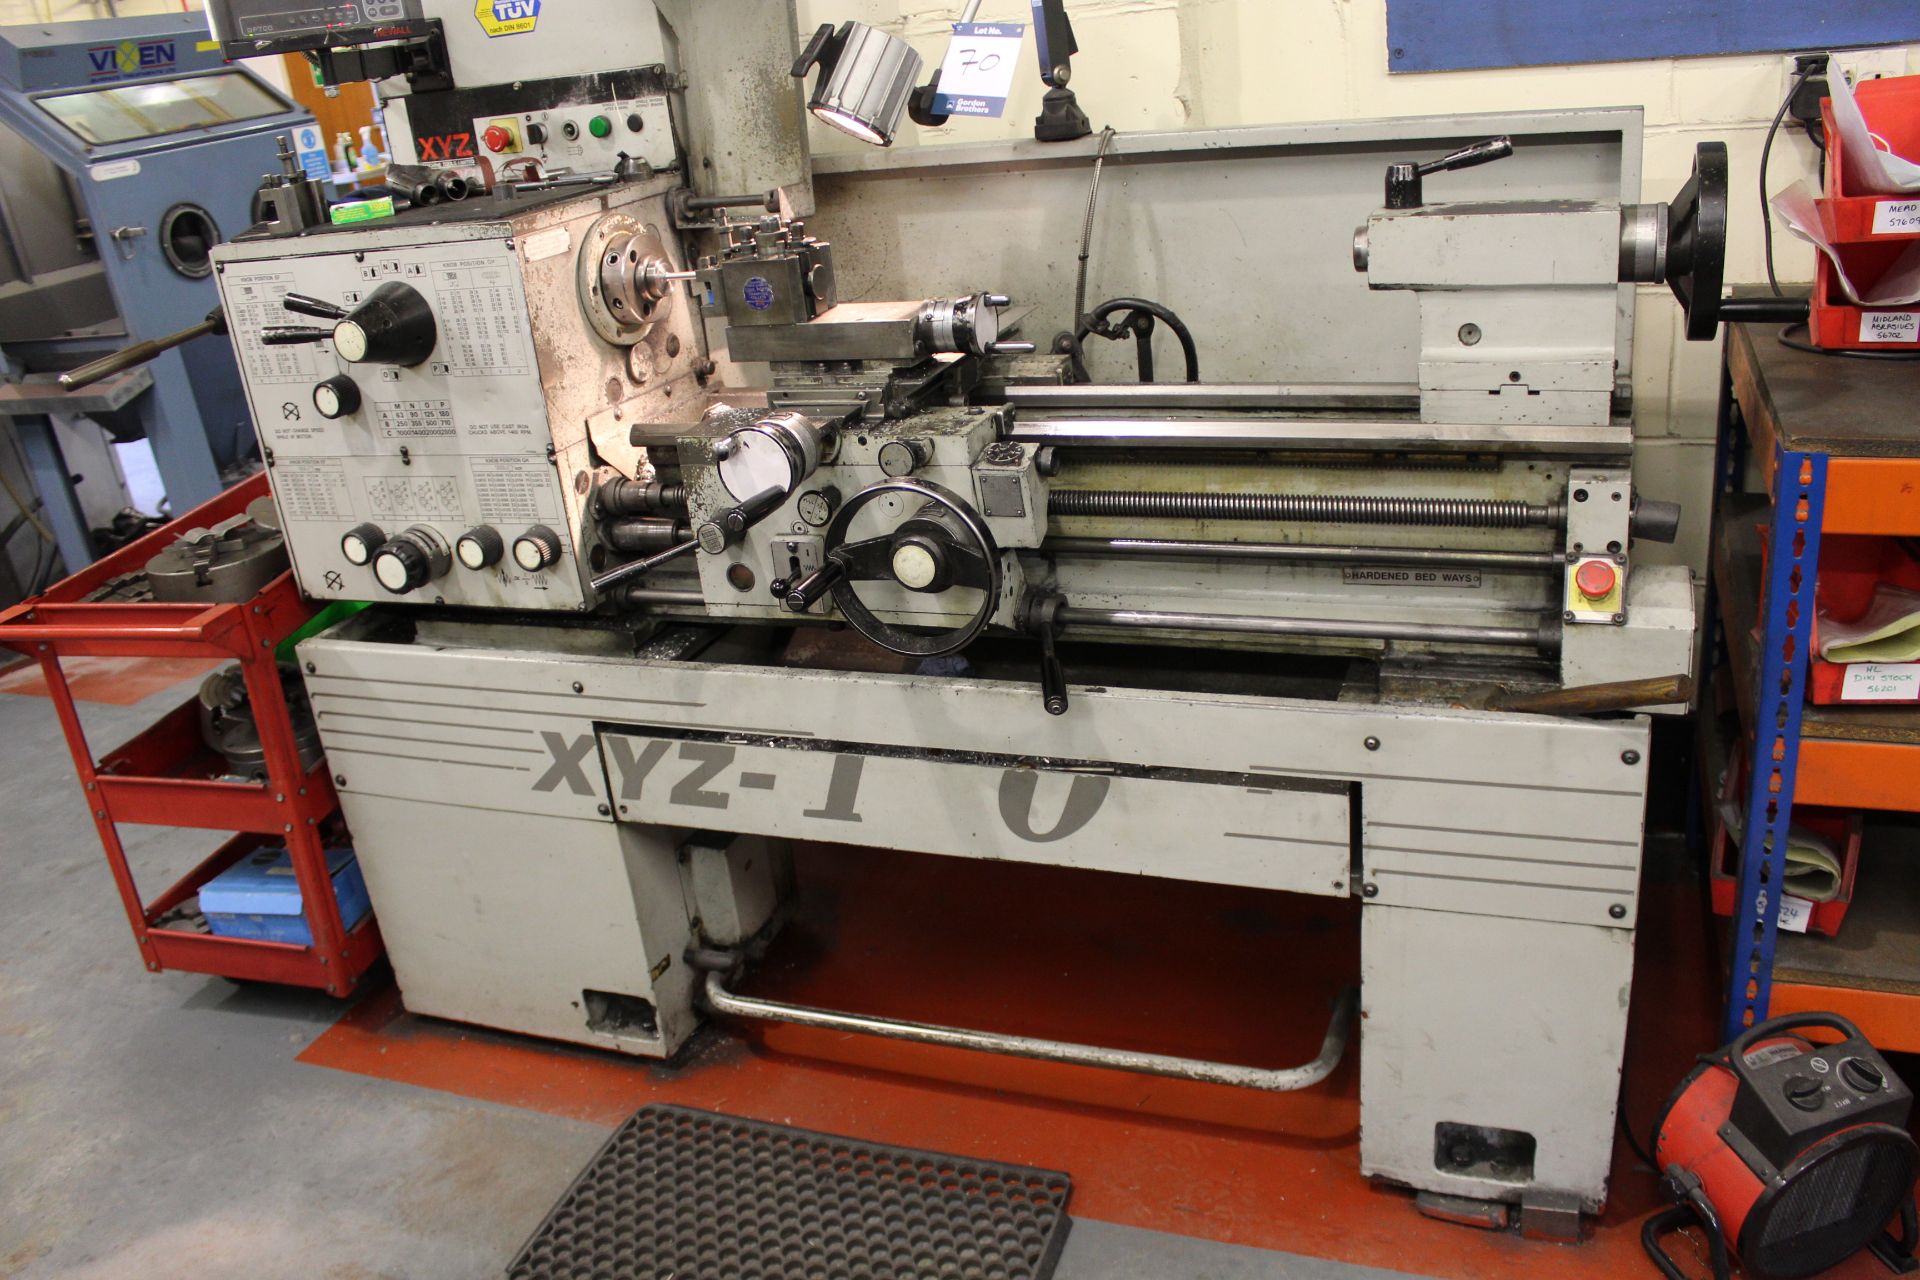 XYZ Machine Tools 1400 gap bed centre lathe, swing over bed: 356mm, swing in gap: 559mm, distance